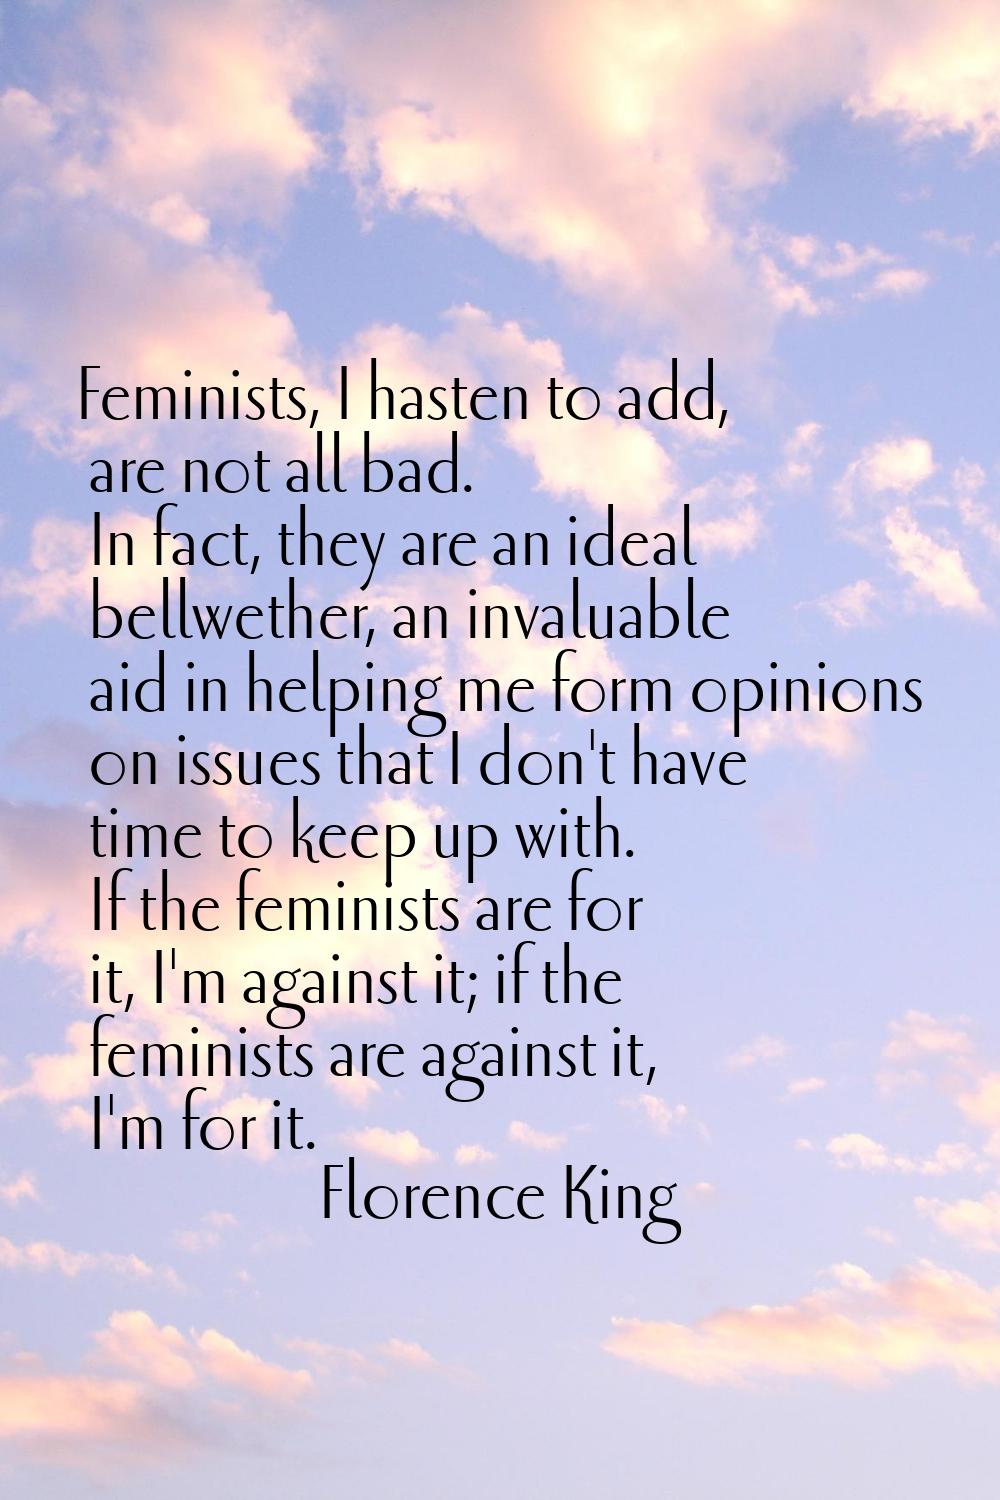 Feminists, I hasten to add, are not all bad. In fact, they are an ideal bellwether, an invaluable a